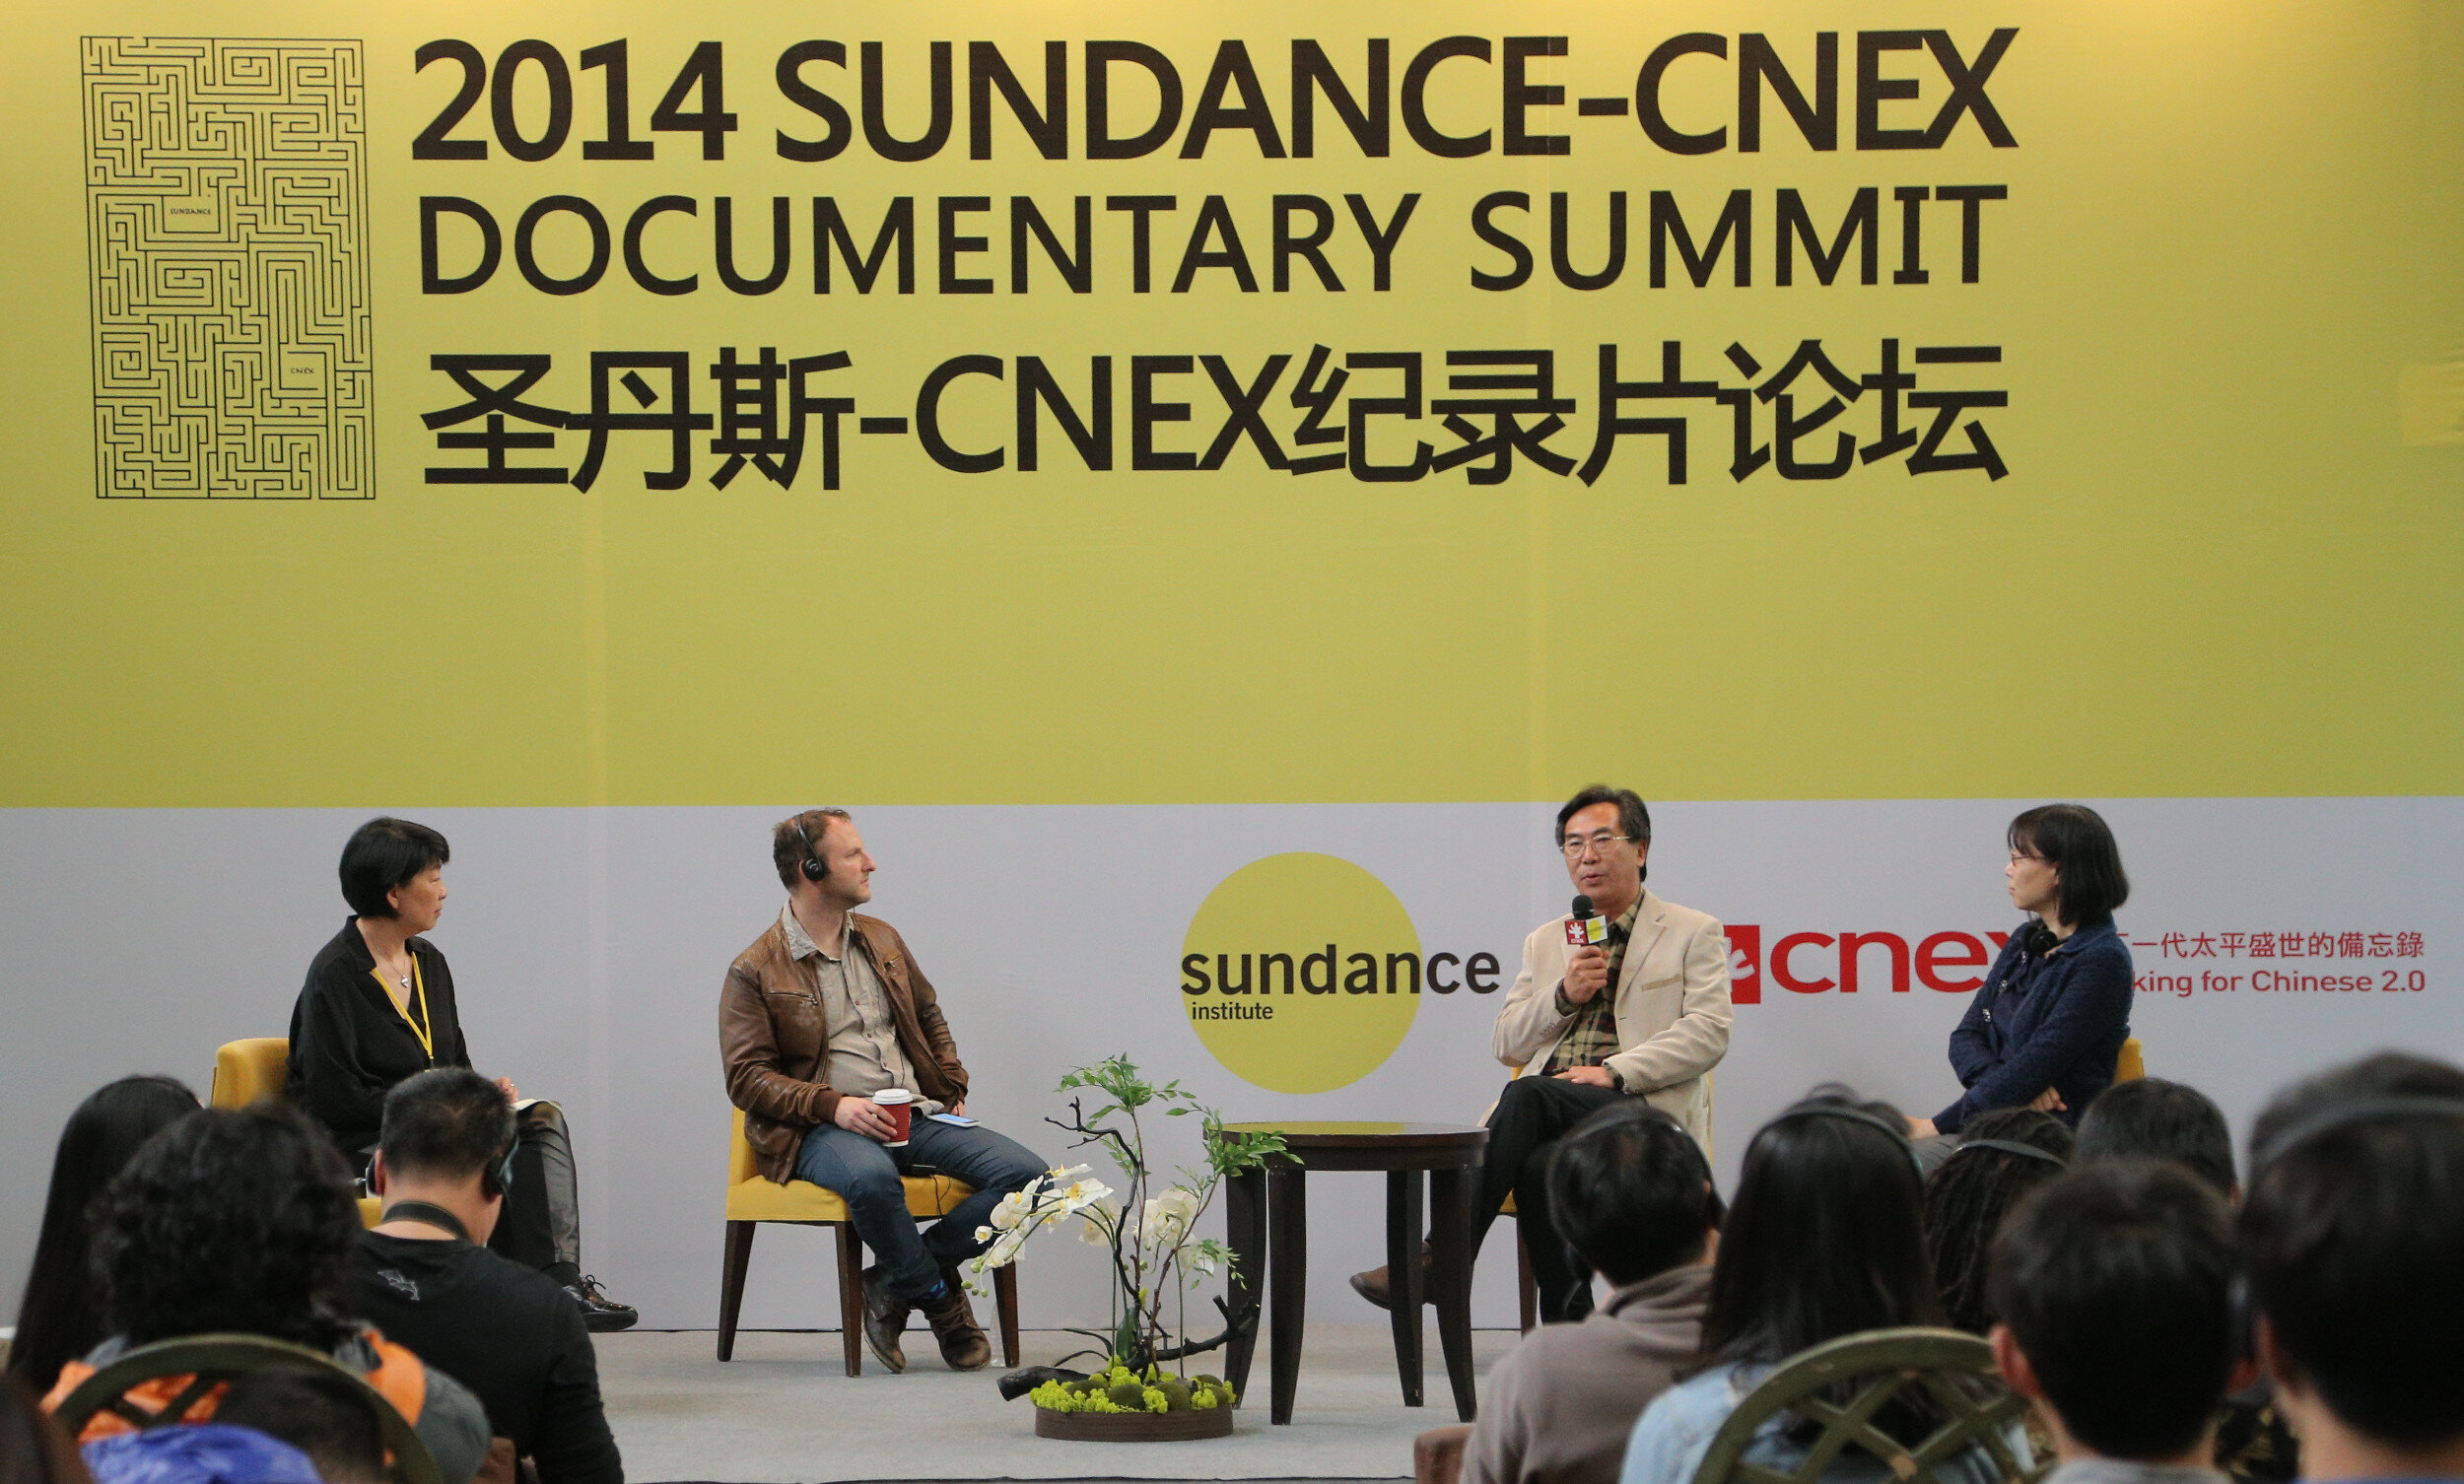  Marc as Keynote Speaker at a storytelling workshop in Beijing for the Sundance Institute and CNEX. 